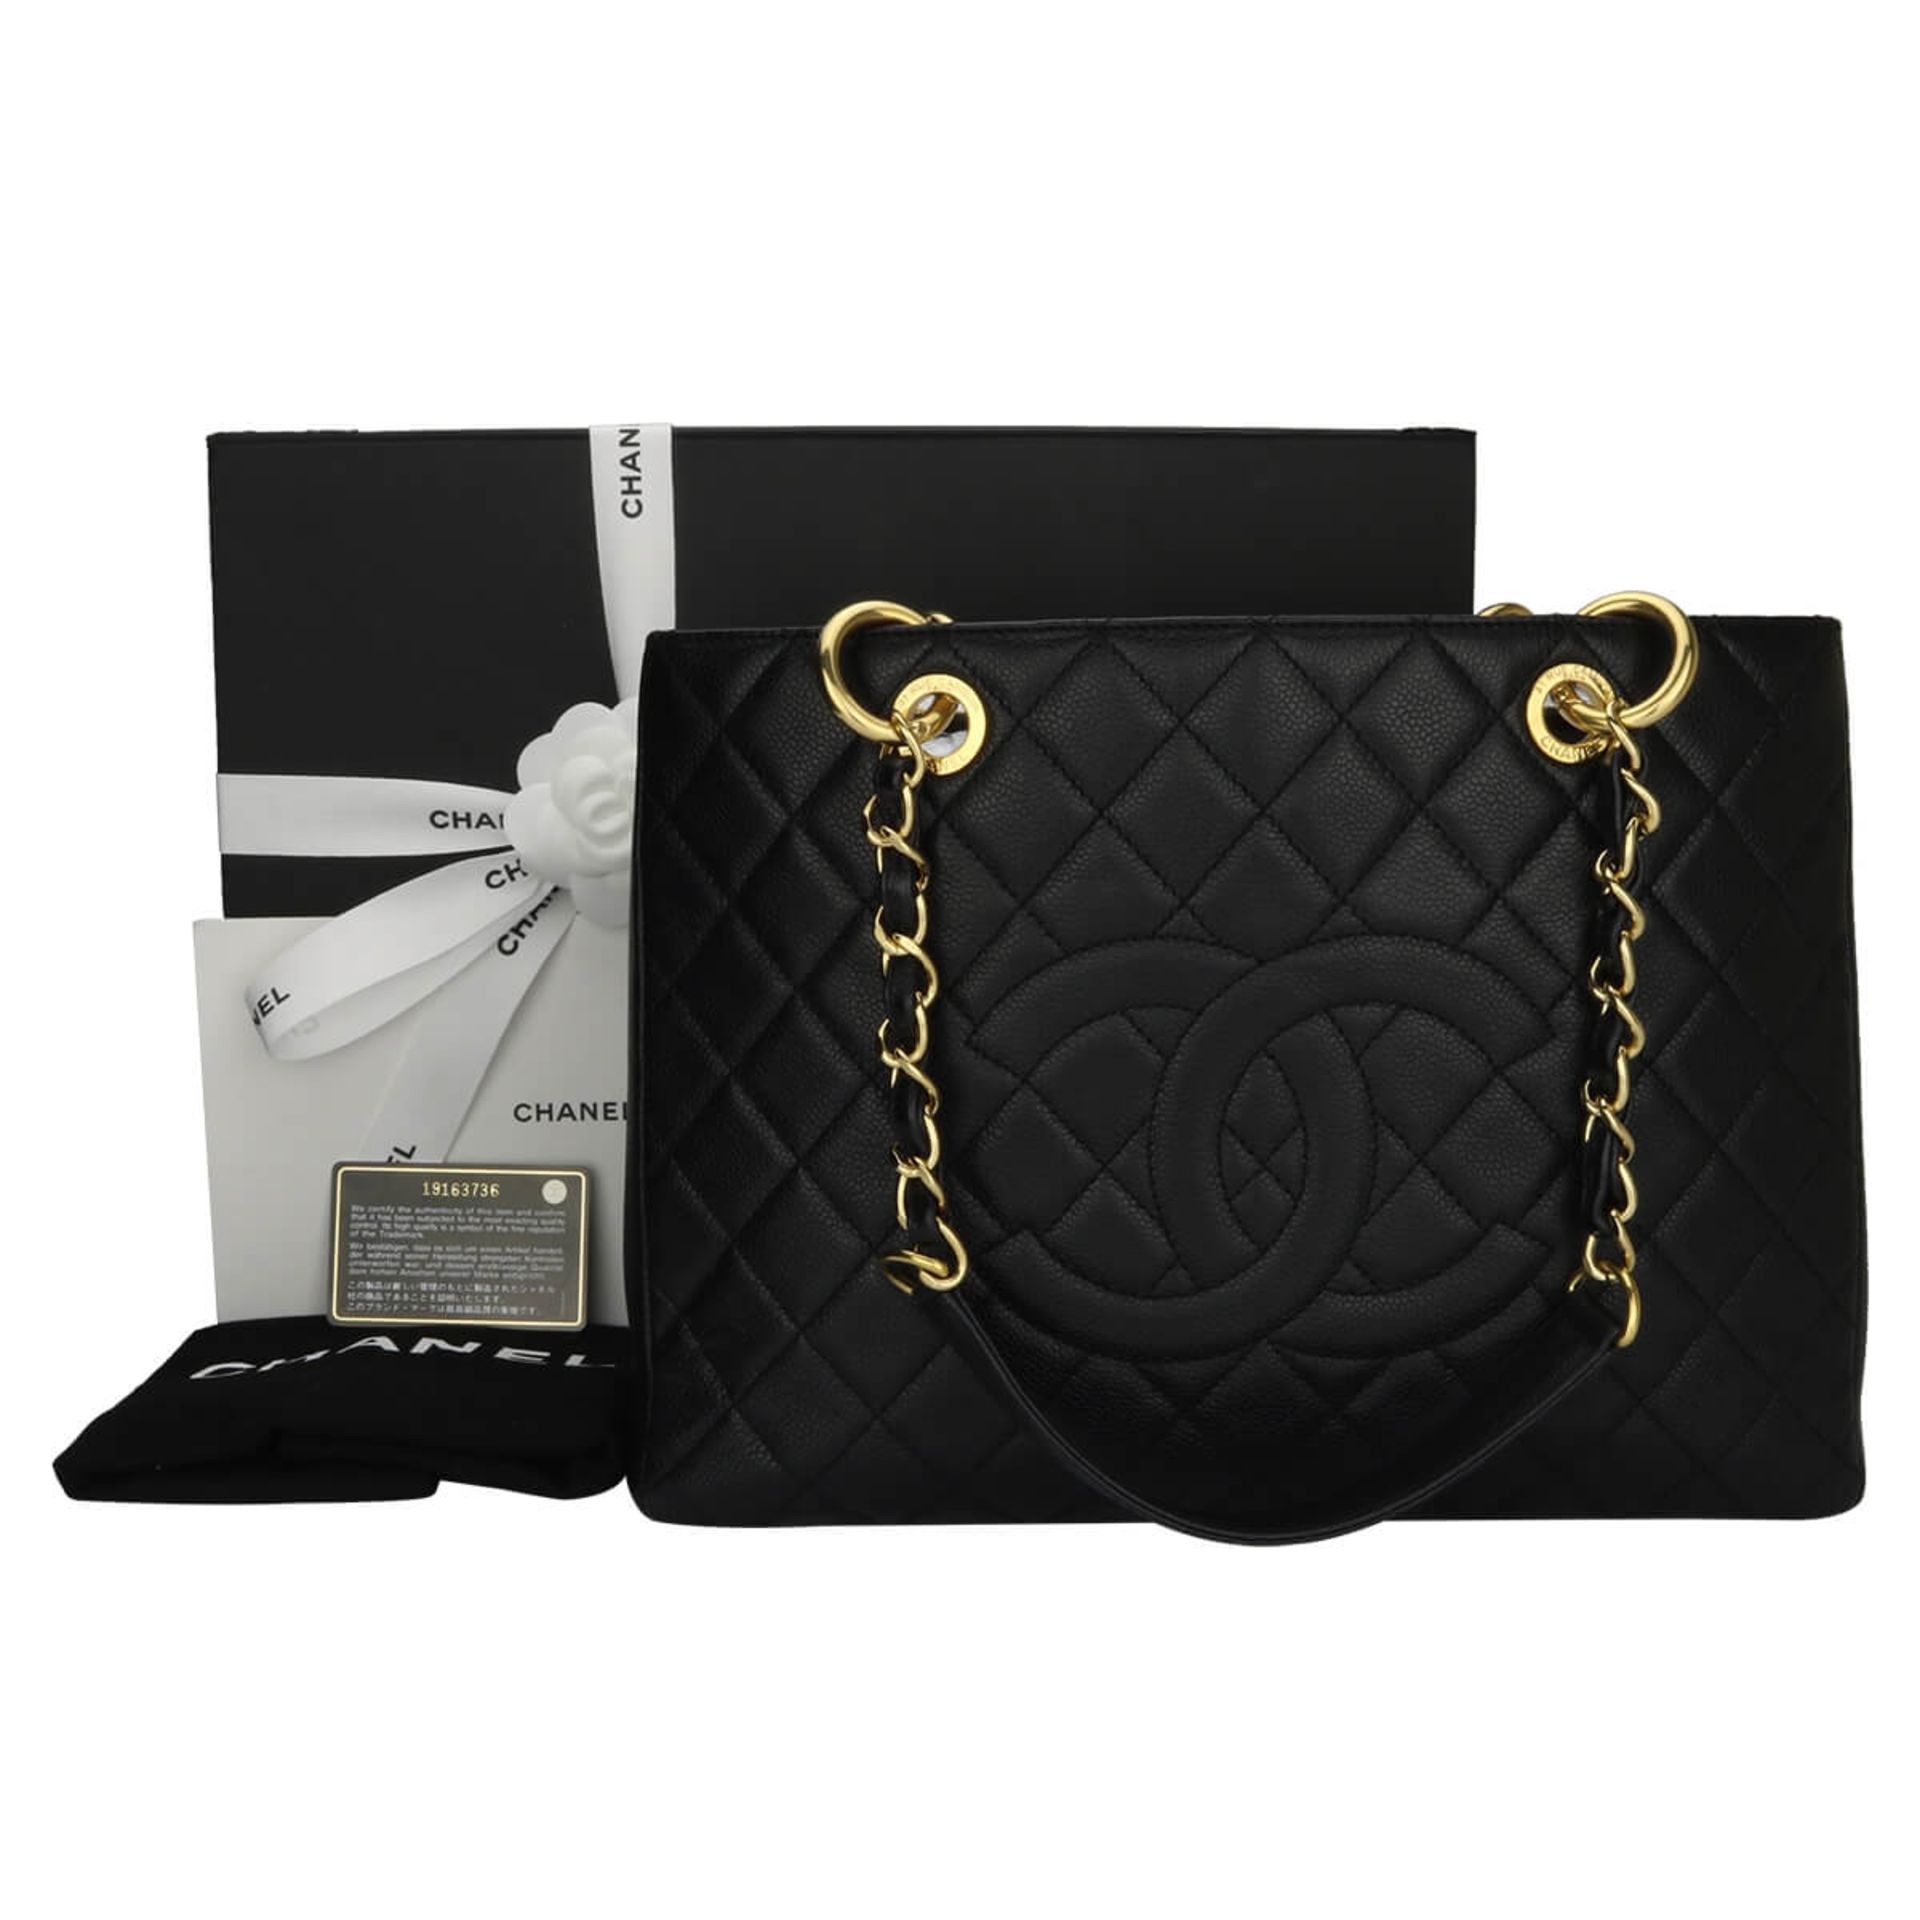 Chanel Grand Shopping Tote (GST) Black Caviar Gold Hardware 2014 - Image 2 of 5